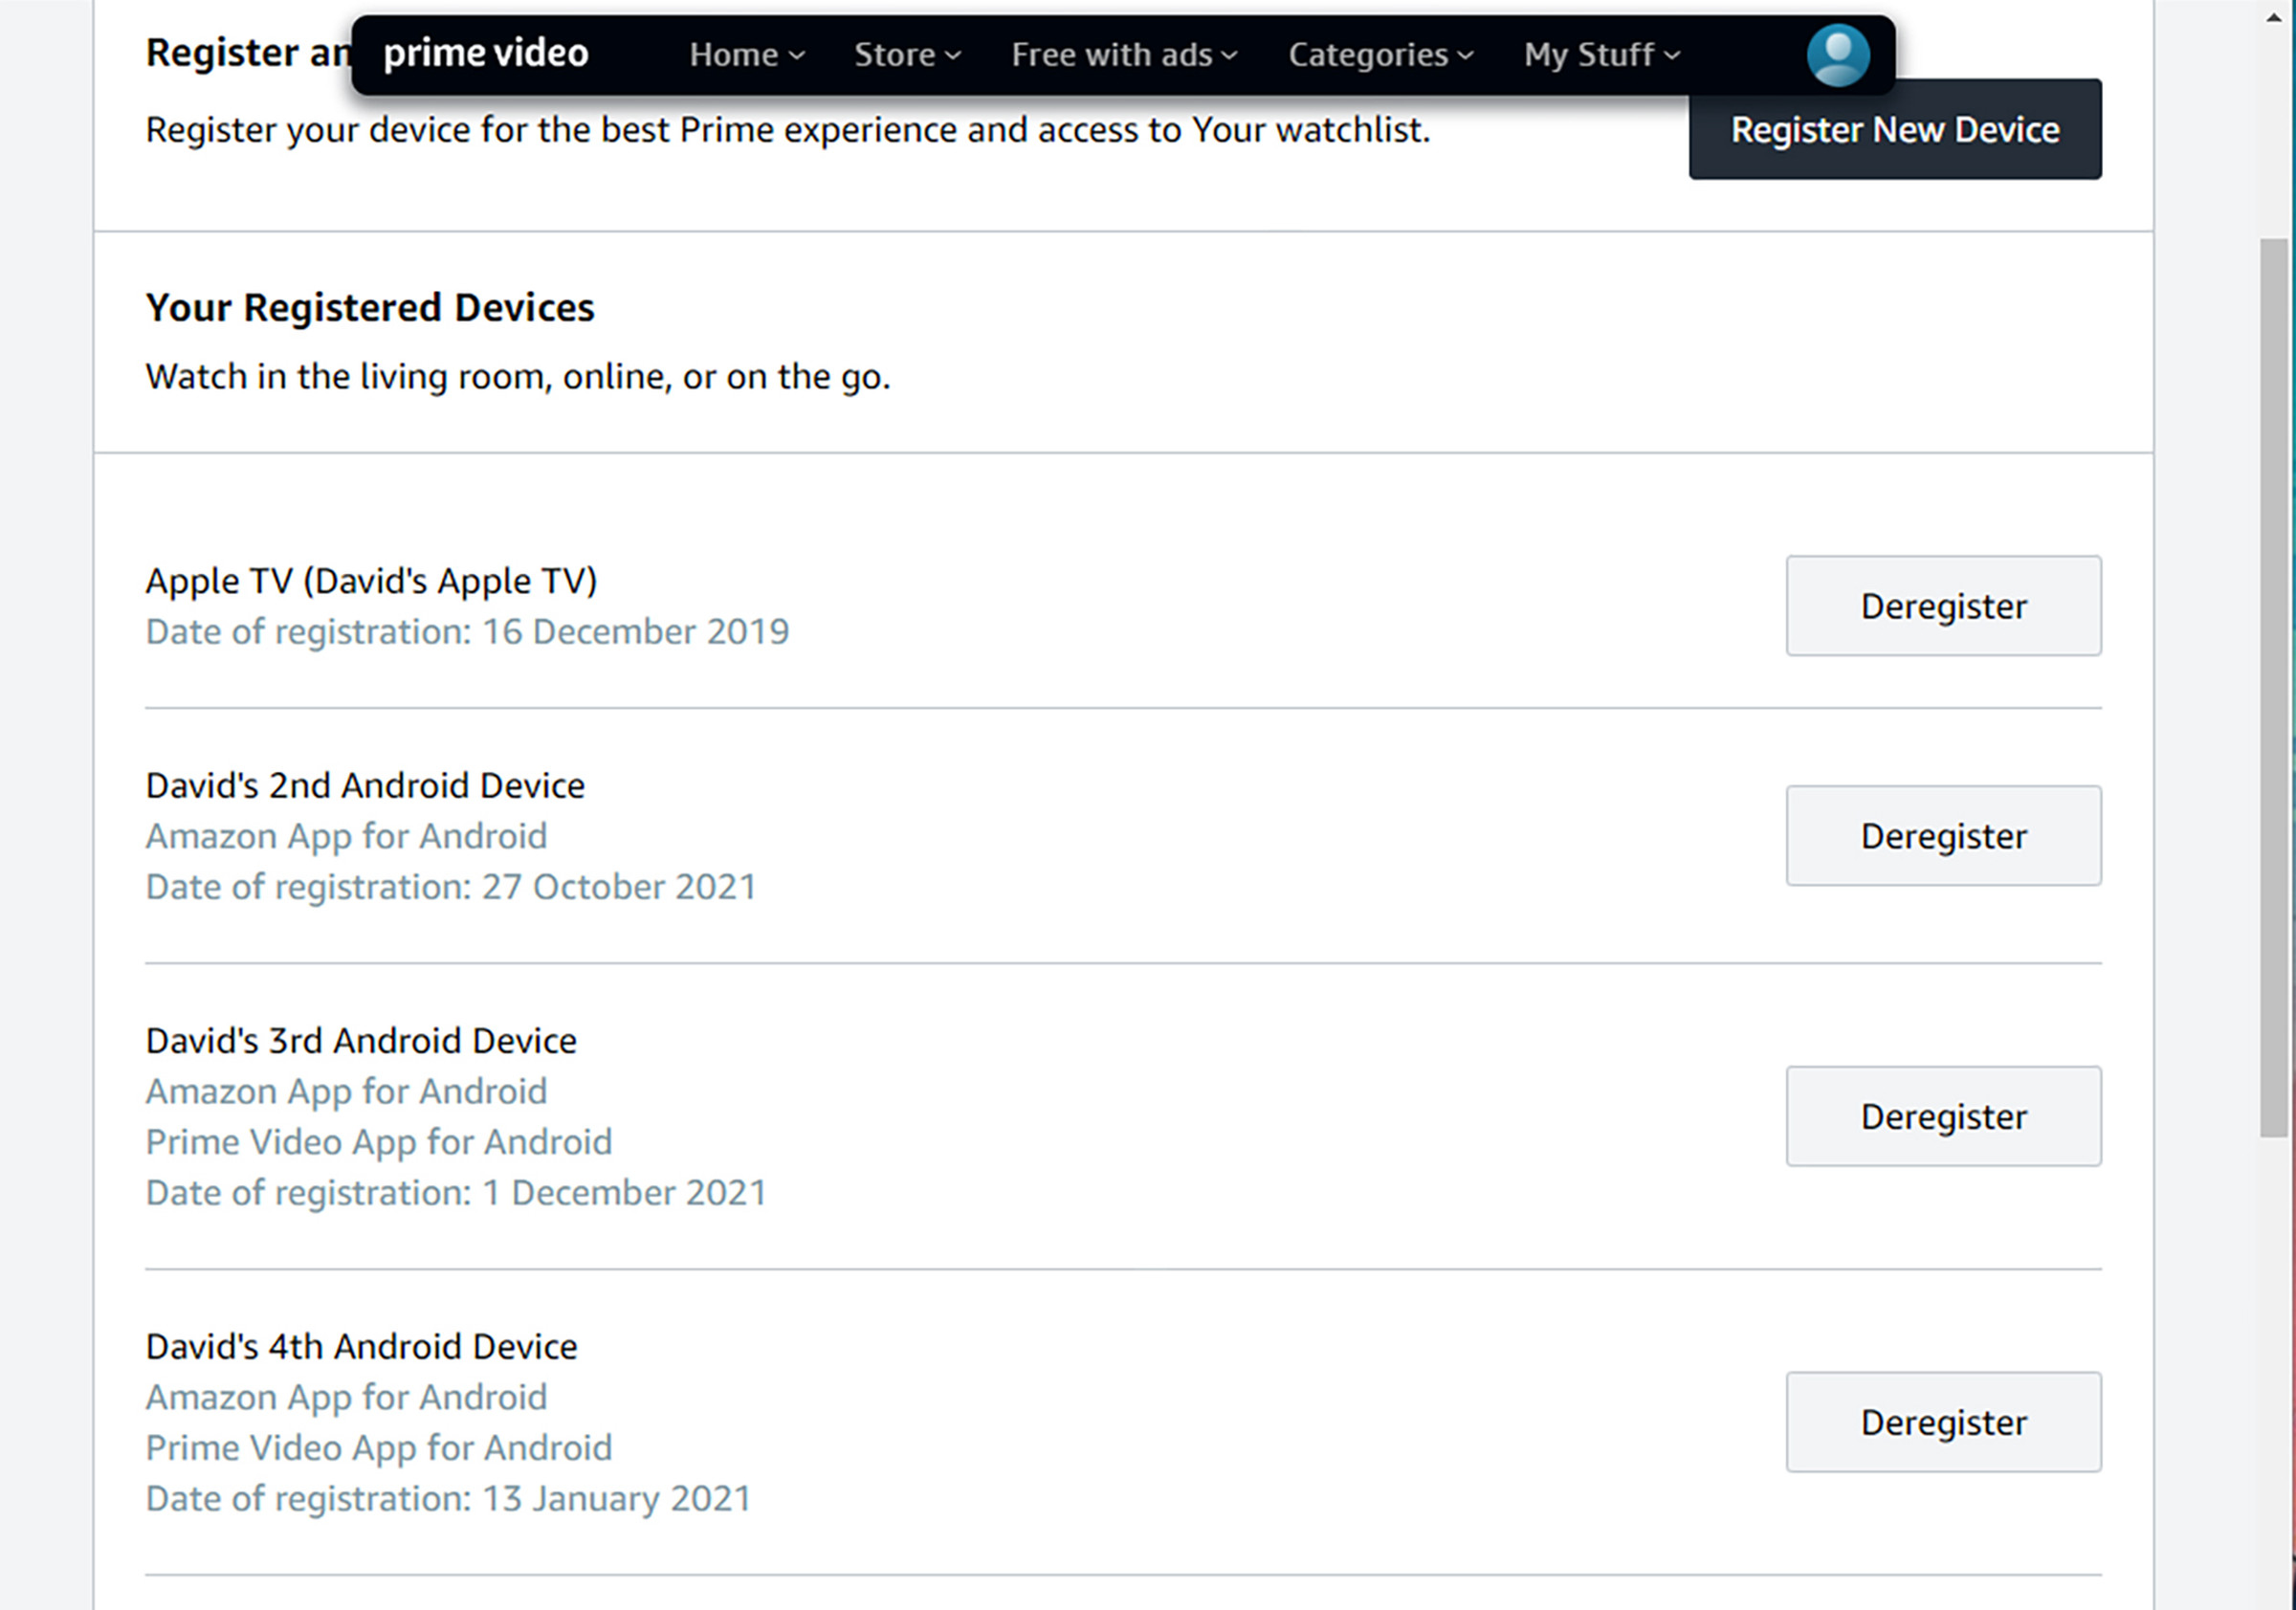 A list of devices under the heading Your Registered Devices.